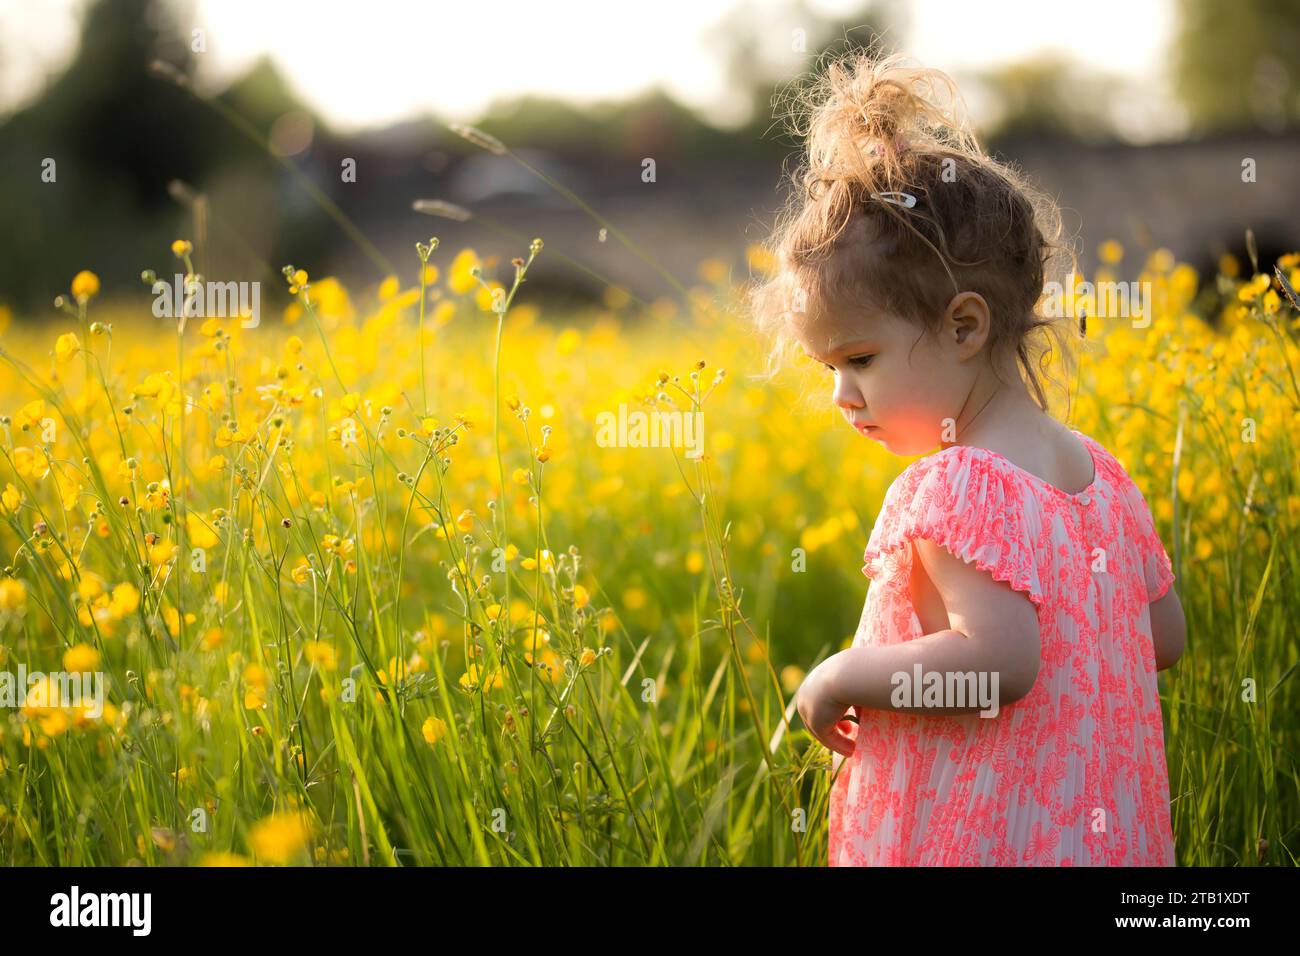 A young girl in a pink dress stood in buttercup flowers Stock Photo